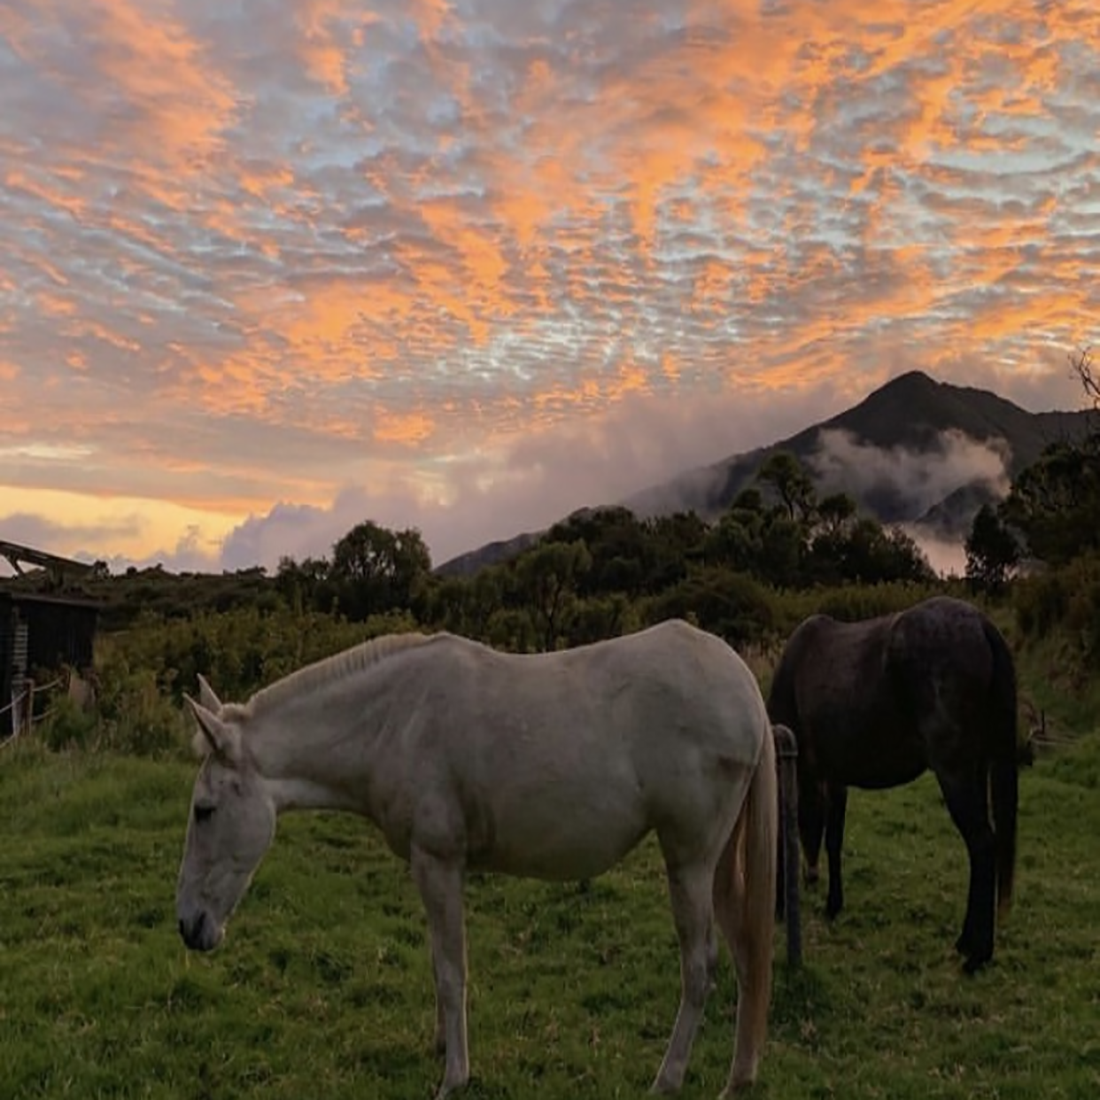 Lōkahi, a white mule, snacks on some grass as the sunset dyes the clouds pink and purple overhead.